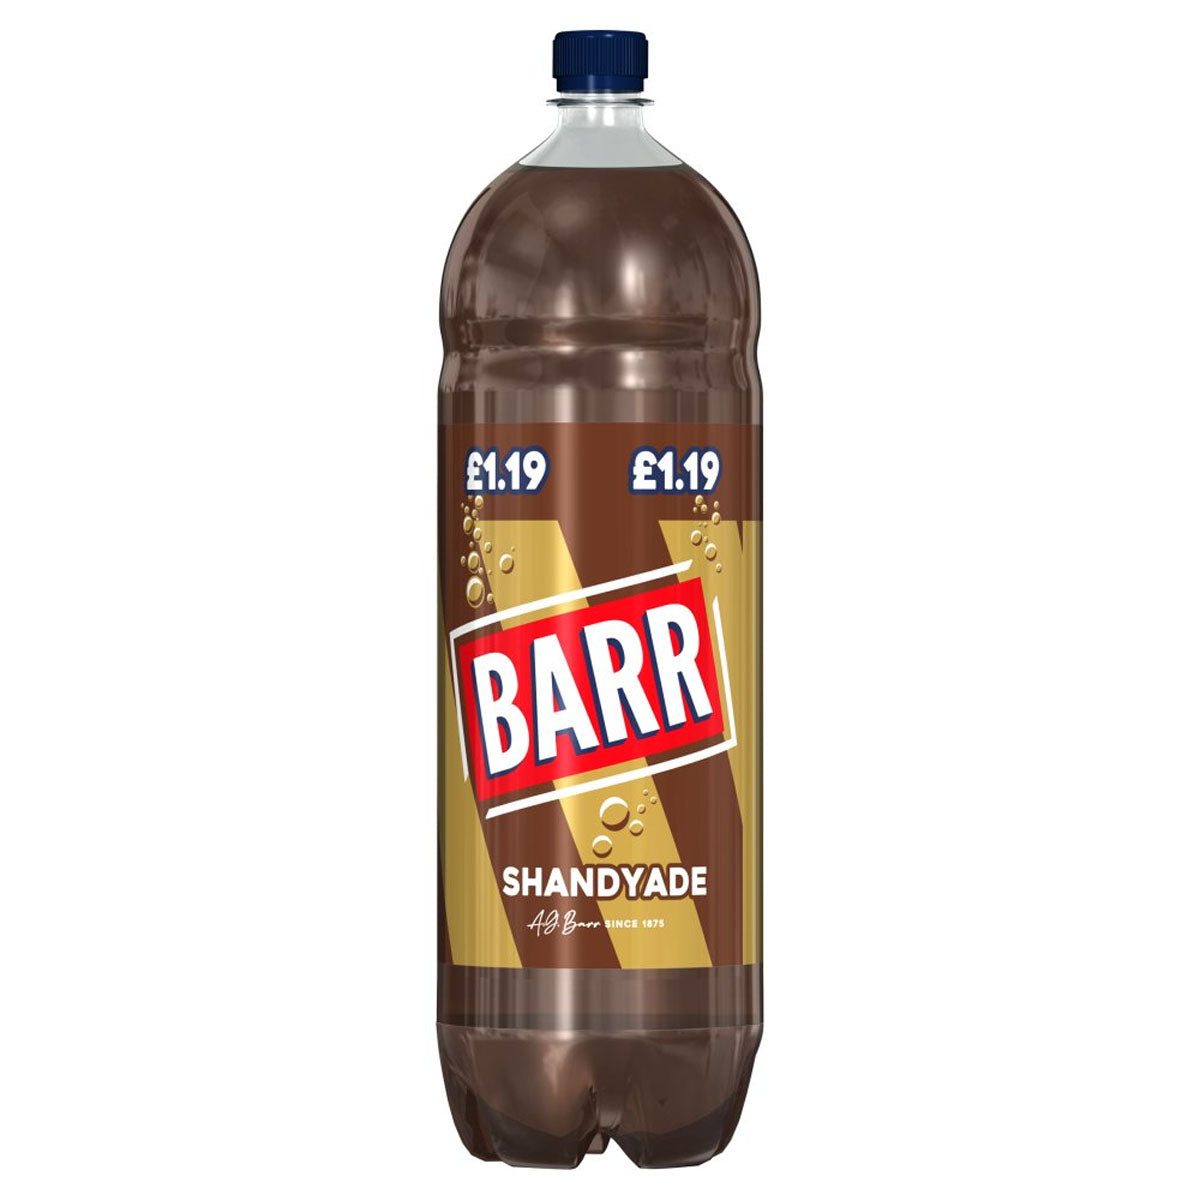 A bottle of Barr - Shandyade 2L on a white background.